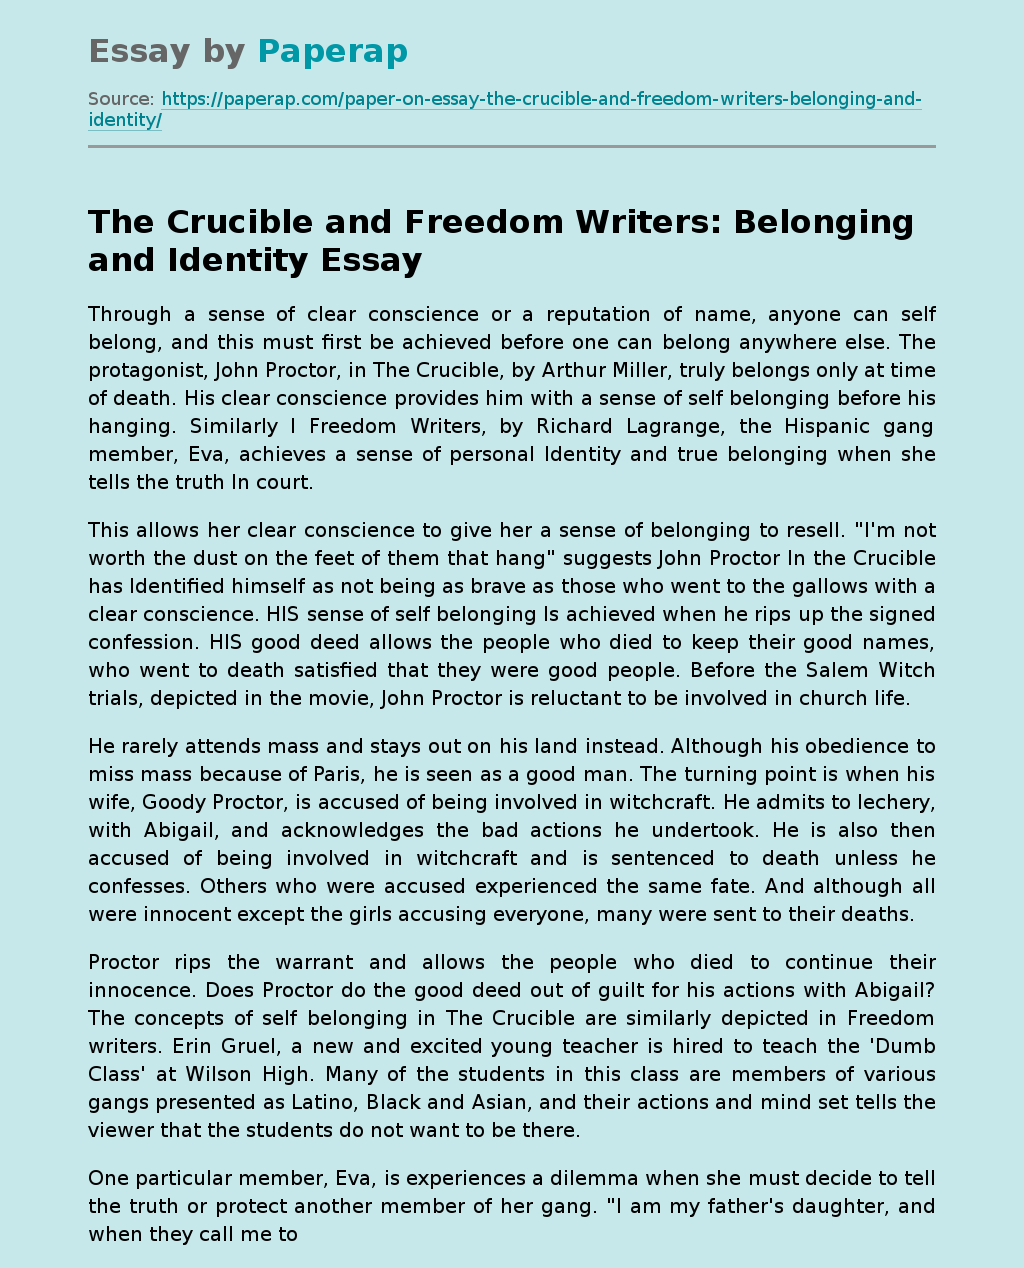 The Crucible and Freedom Writers: Belonging and Identity